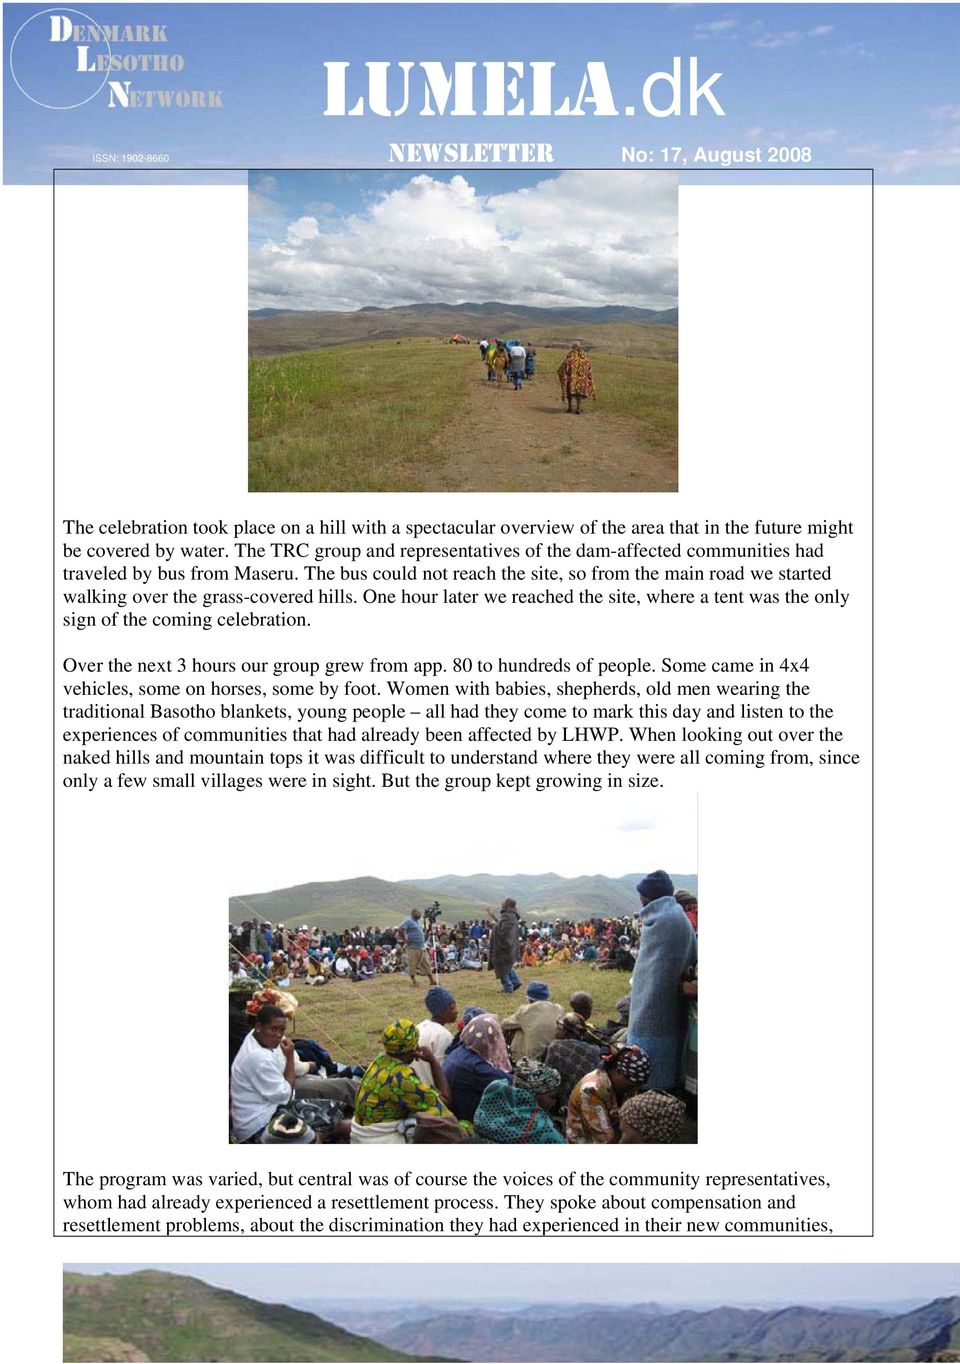 The bus could not reach the site, so from the main road we started walking over the grass-covered hills. One hour later we reached the site, where a tent was the only sign of the coming celebration.